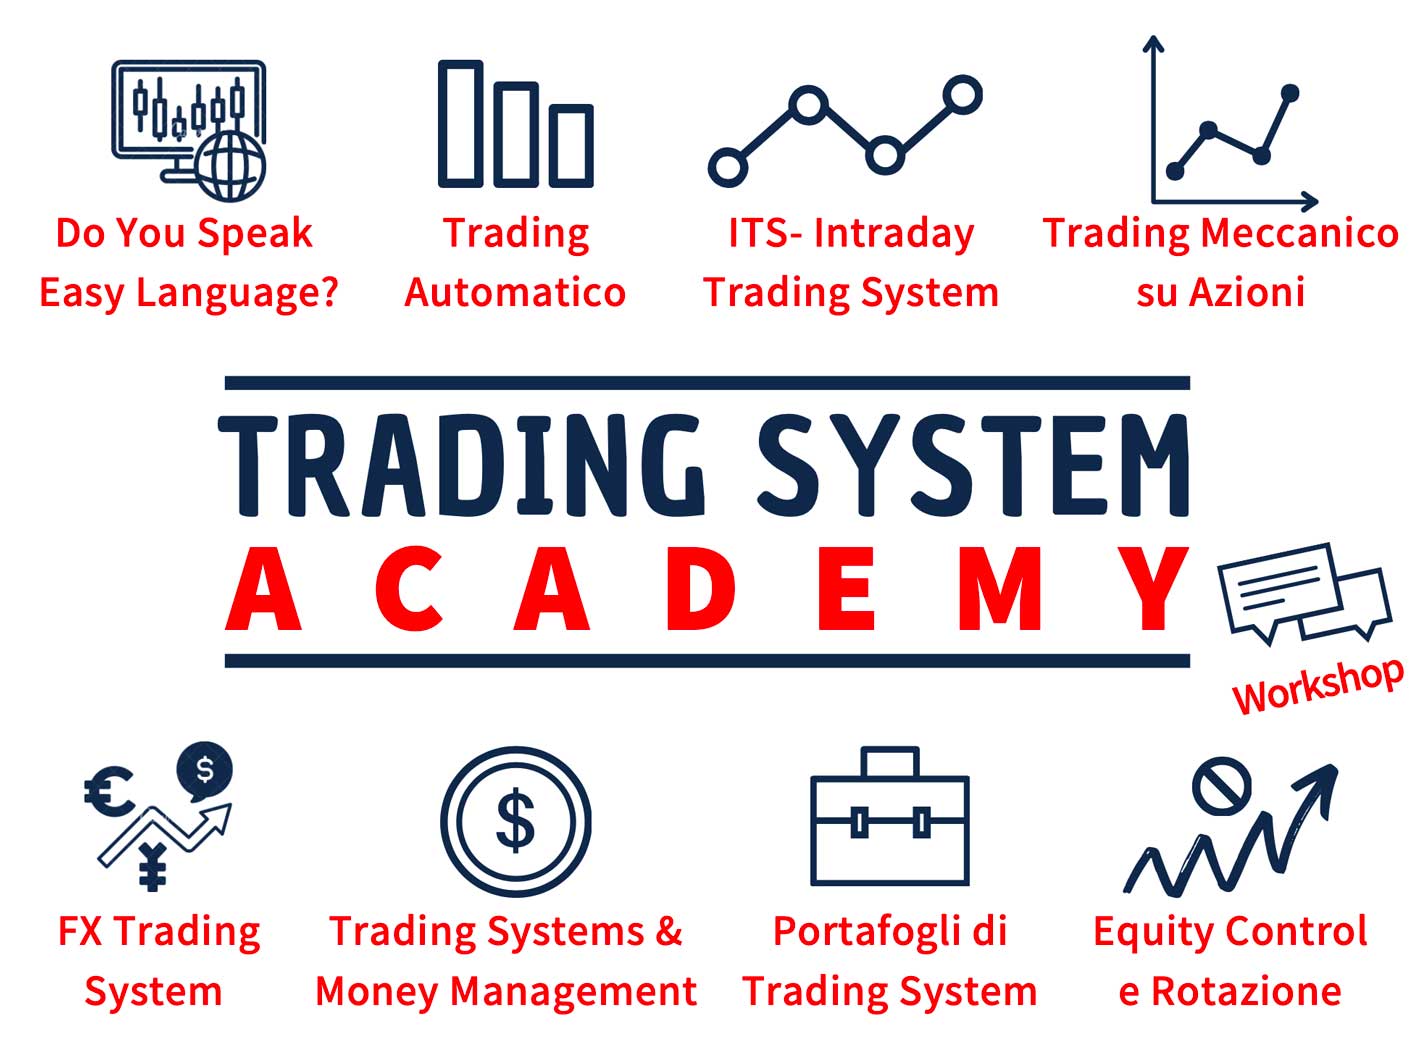 Qtlab corsi trading commodities, trading system academy, corsi commodities qtlab